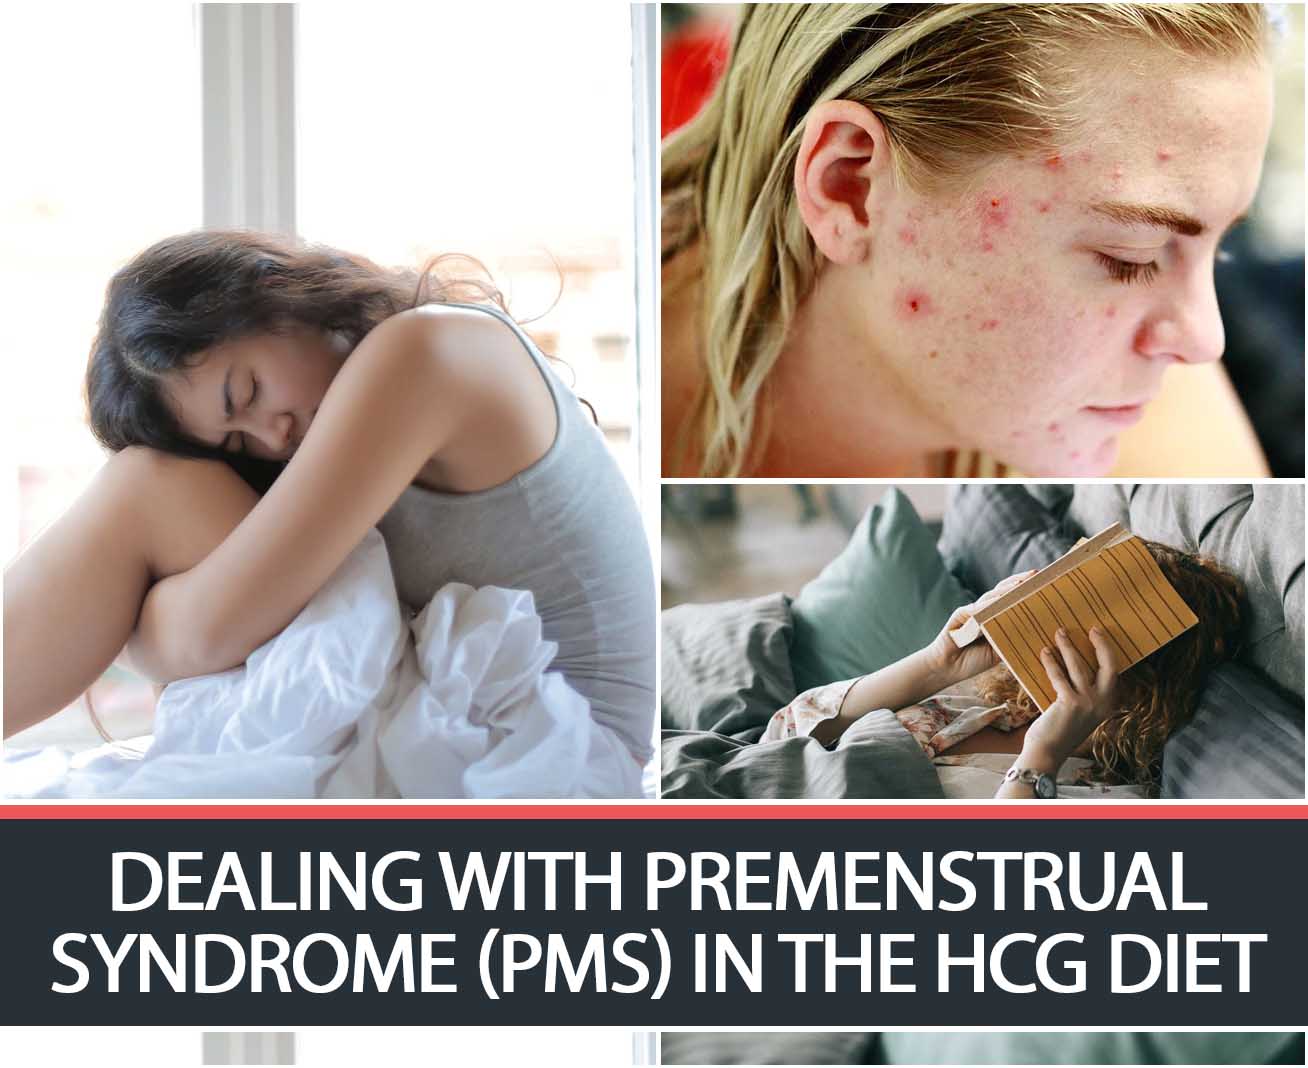 DEALING WITH PREMENSTRUAL SYNDROME (PMS) IN THE HCG DIET ...